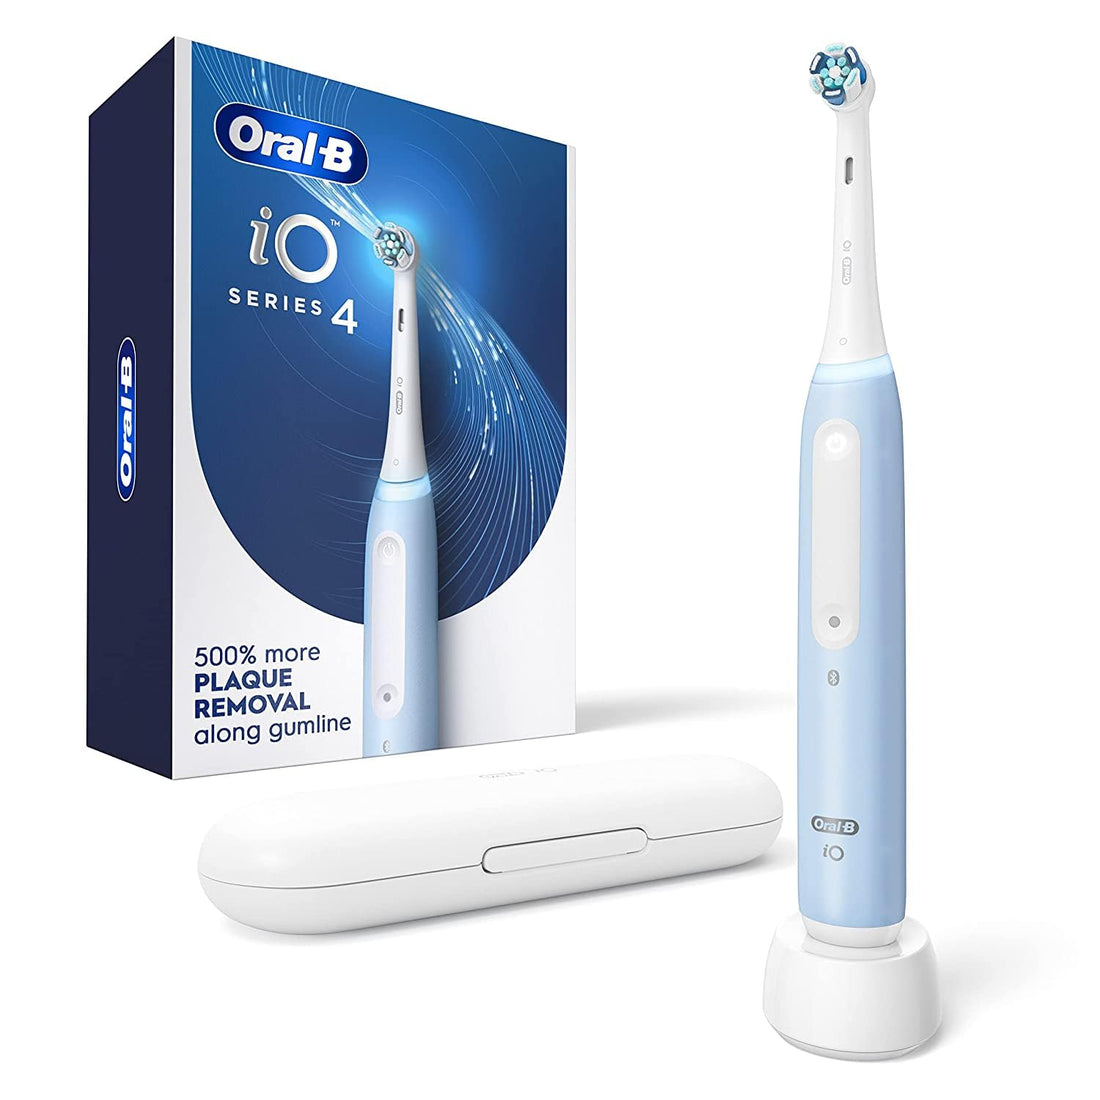 Oral-B iO Series 4 Electric Toothbrush with (1) Brush Head, Rechargeable, Light Blue